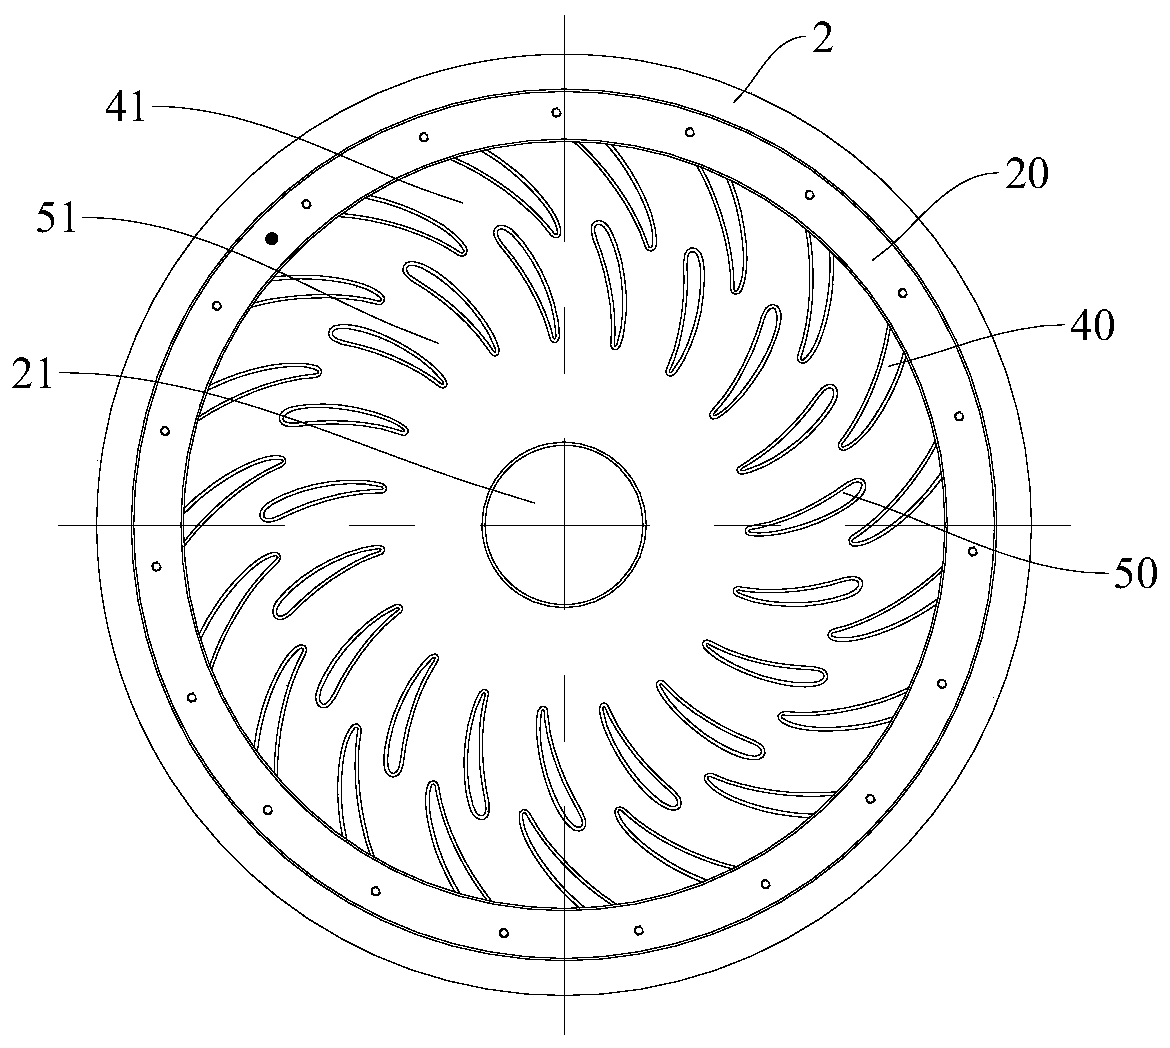 Reflux device for centrifugal compressor and centrifugal compressor having same